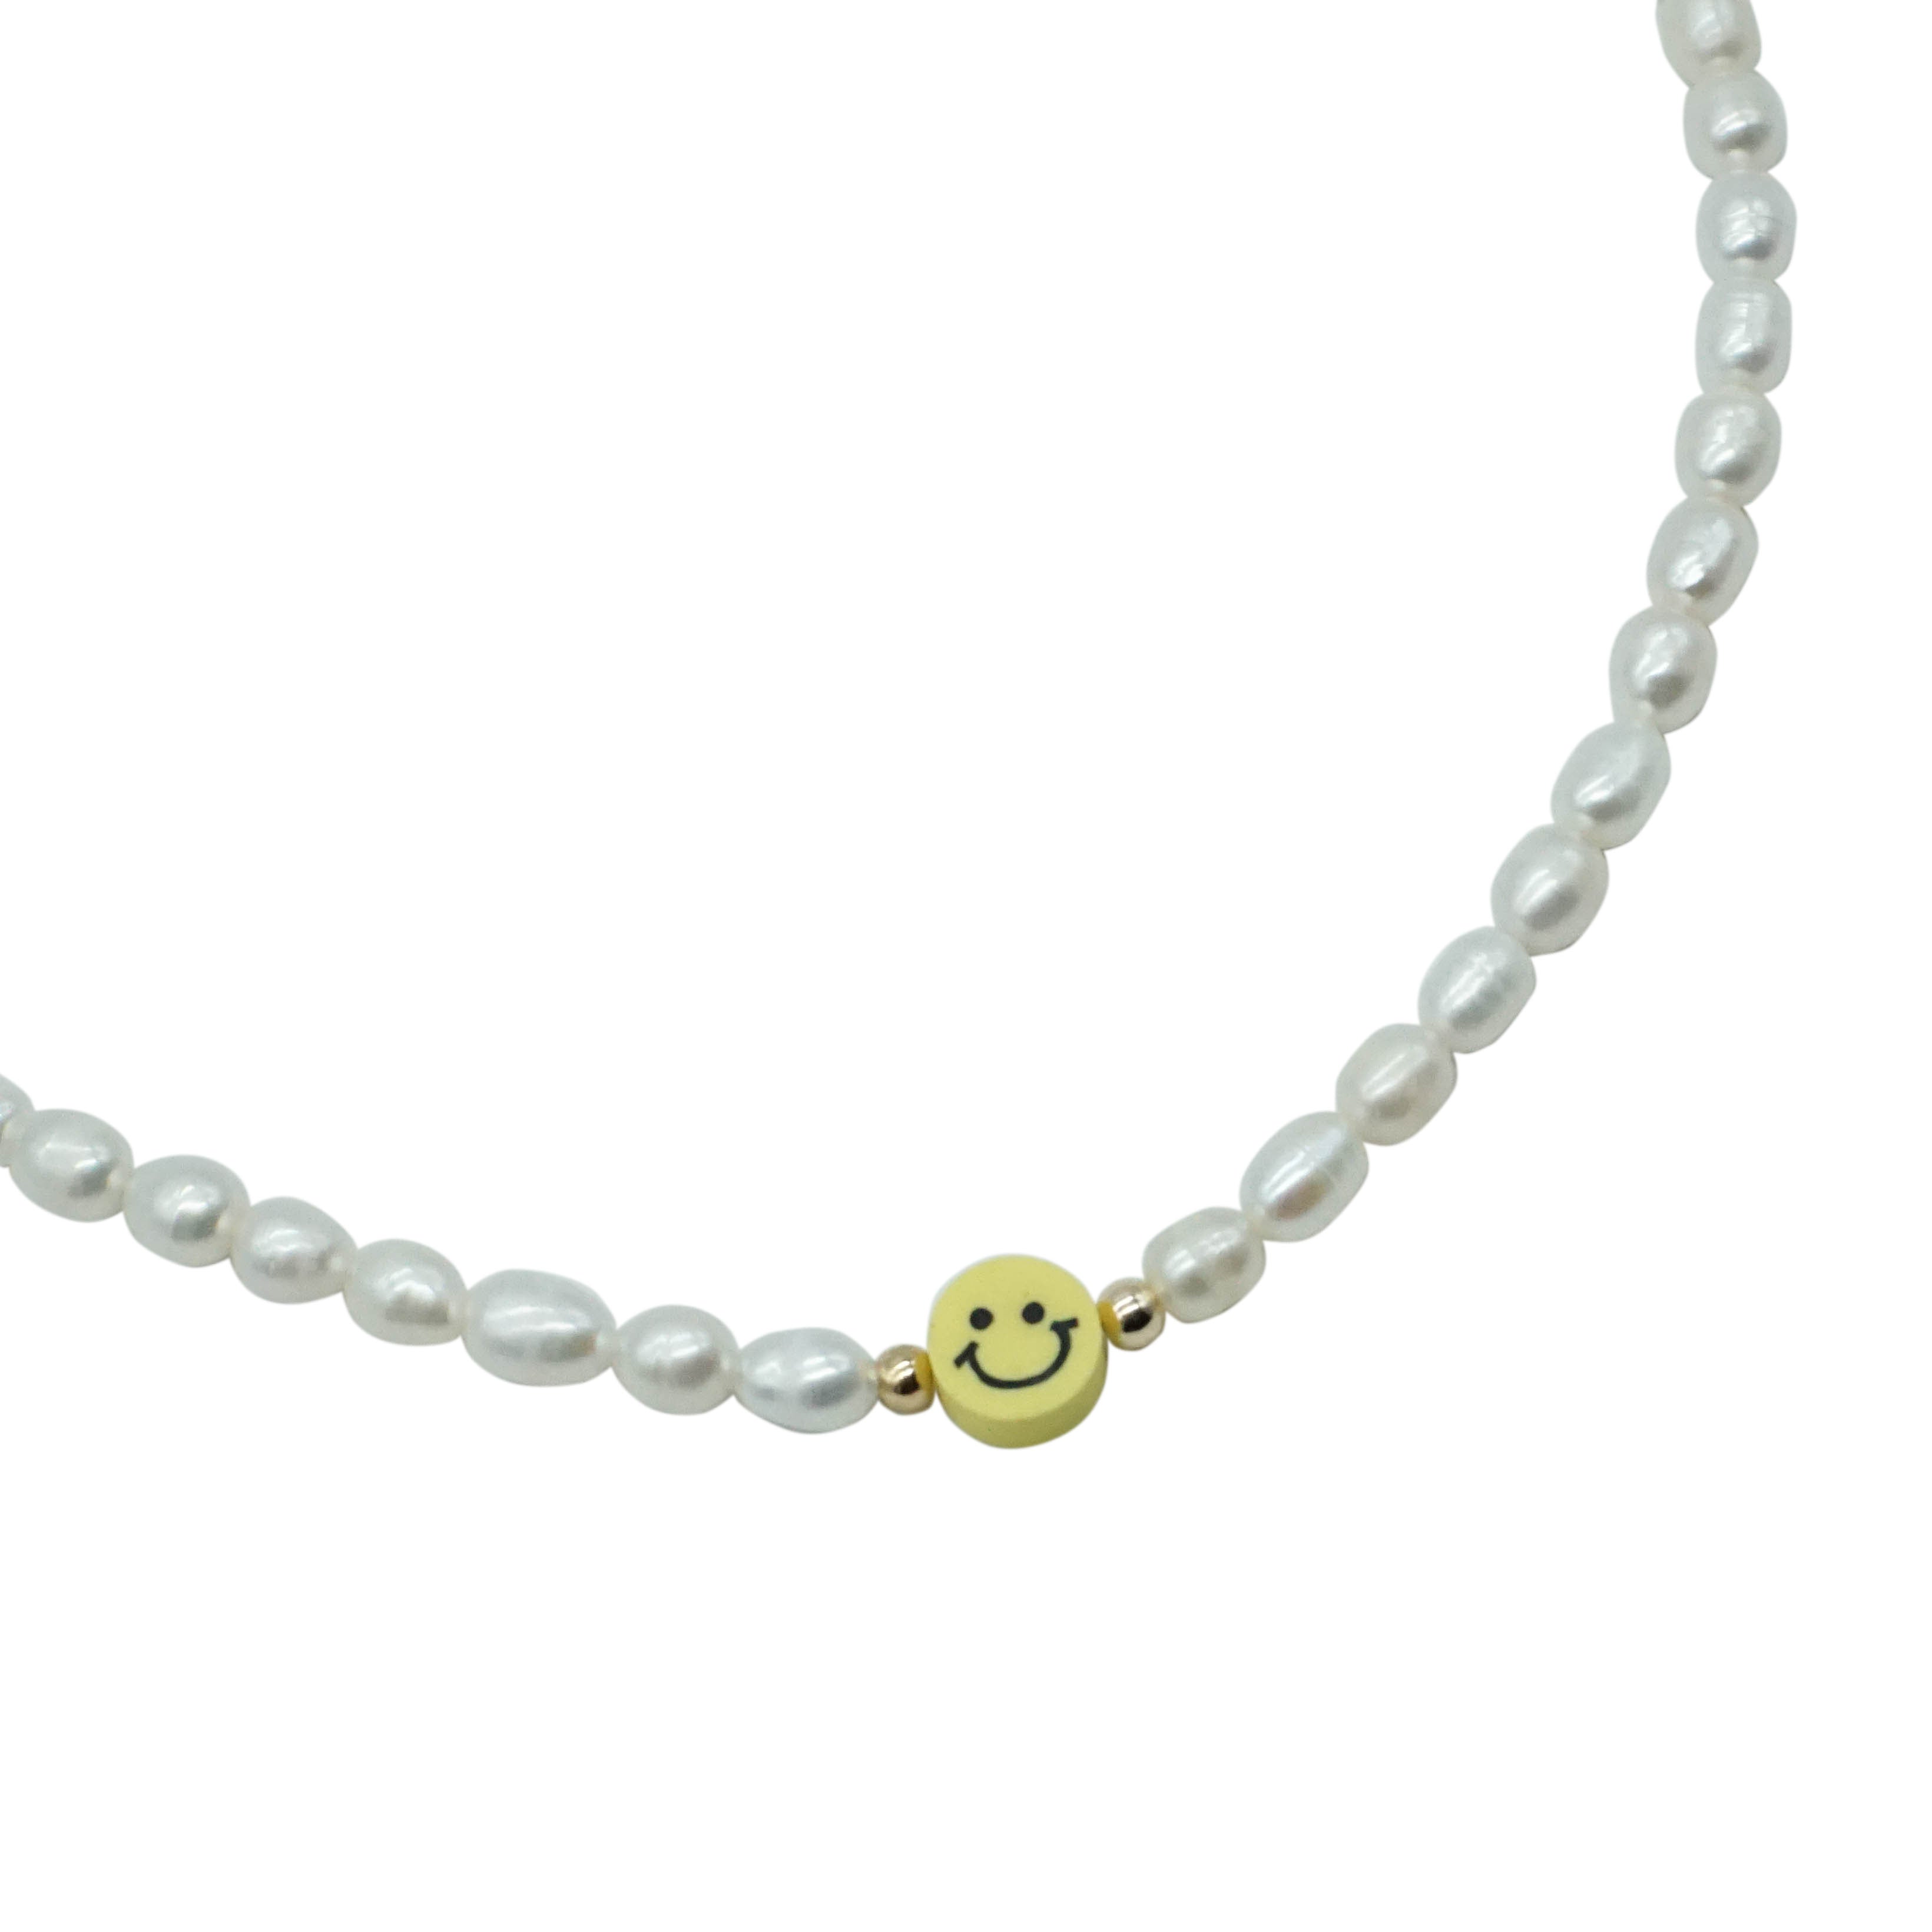 Buy Pearl Charm Necklace Mushroom Pearl Smiley Face Necklace Kitchen Sink  Necklace Adjustable Beaded Pearl Necklace Online in India - Etsy